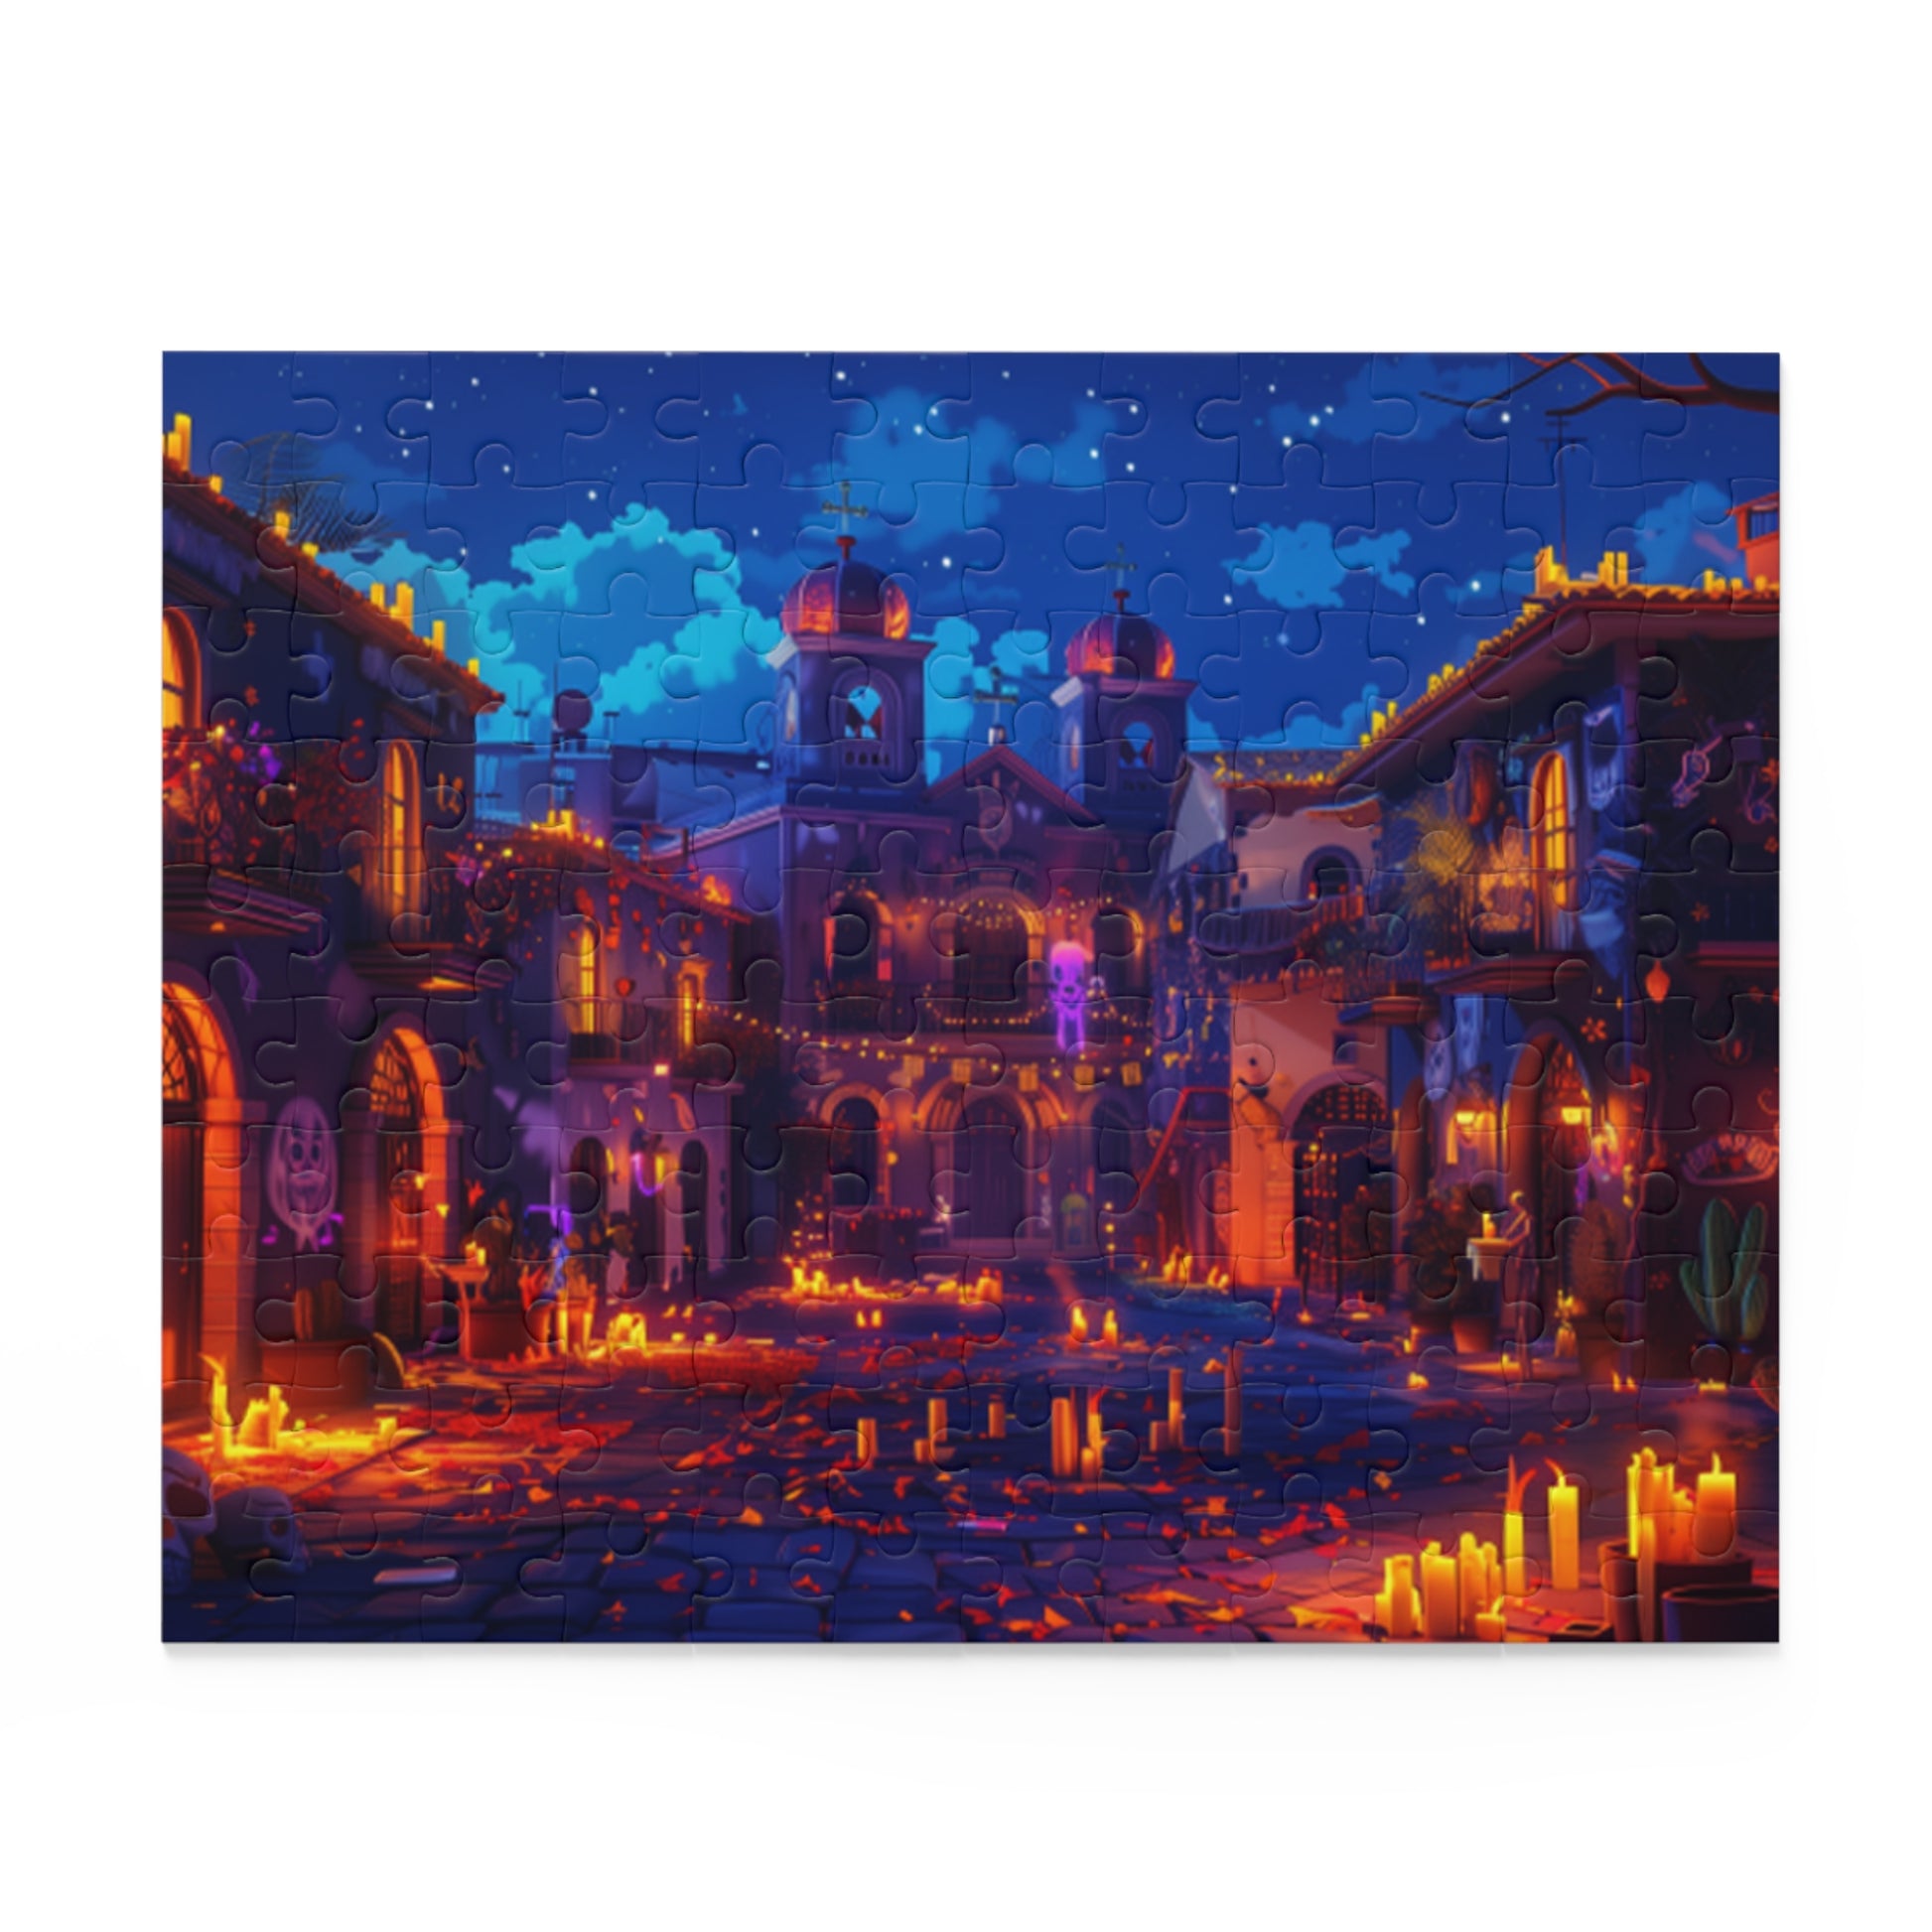 Mexican Art Candle Night Church Retro Jigsaw Puzzle Adult Birthday Business Jigsaw Puzzle Gift for Him Funny Humorous Indoor Outdoor Game Gift For Her Online-2